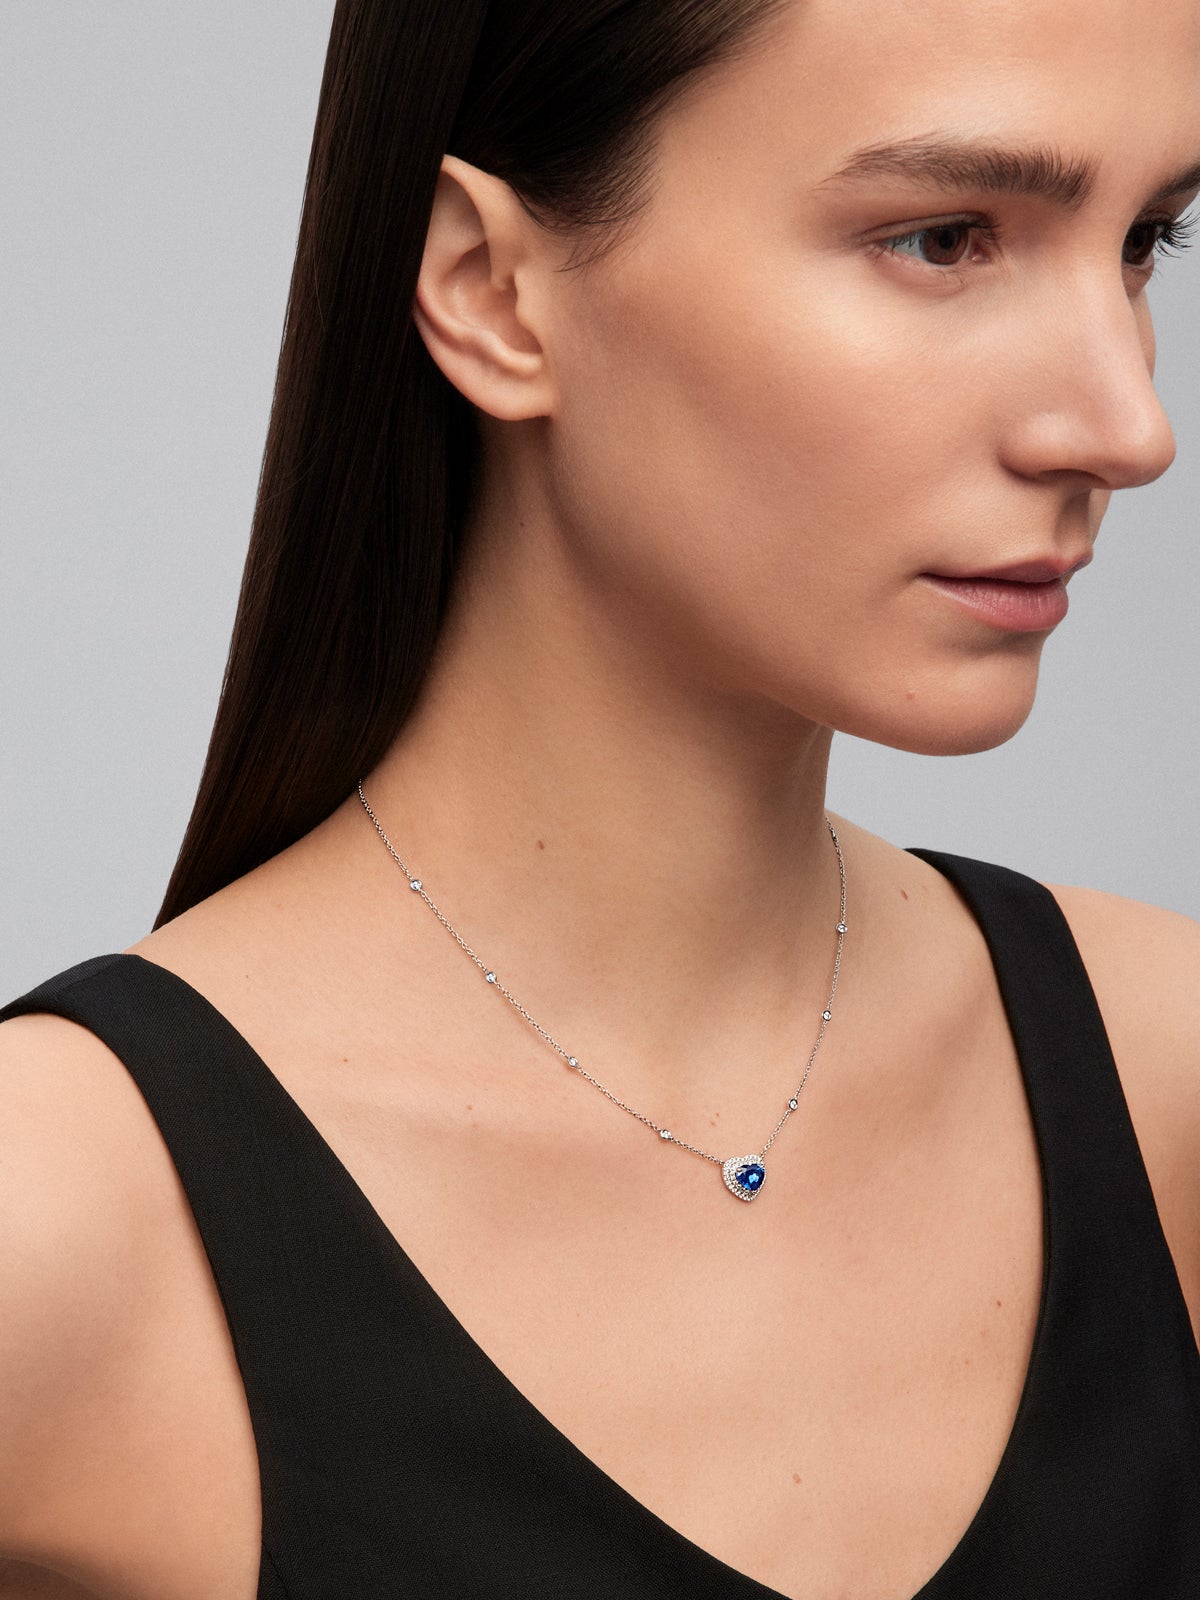 18K white gold pendant with heart-cut royal blue sapphire of 1.51 cts and 59 brilliant-cut diamonds with a total of 0.3 cts